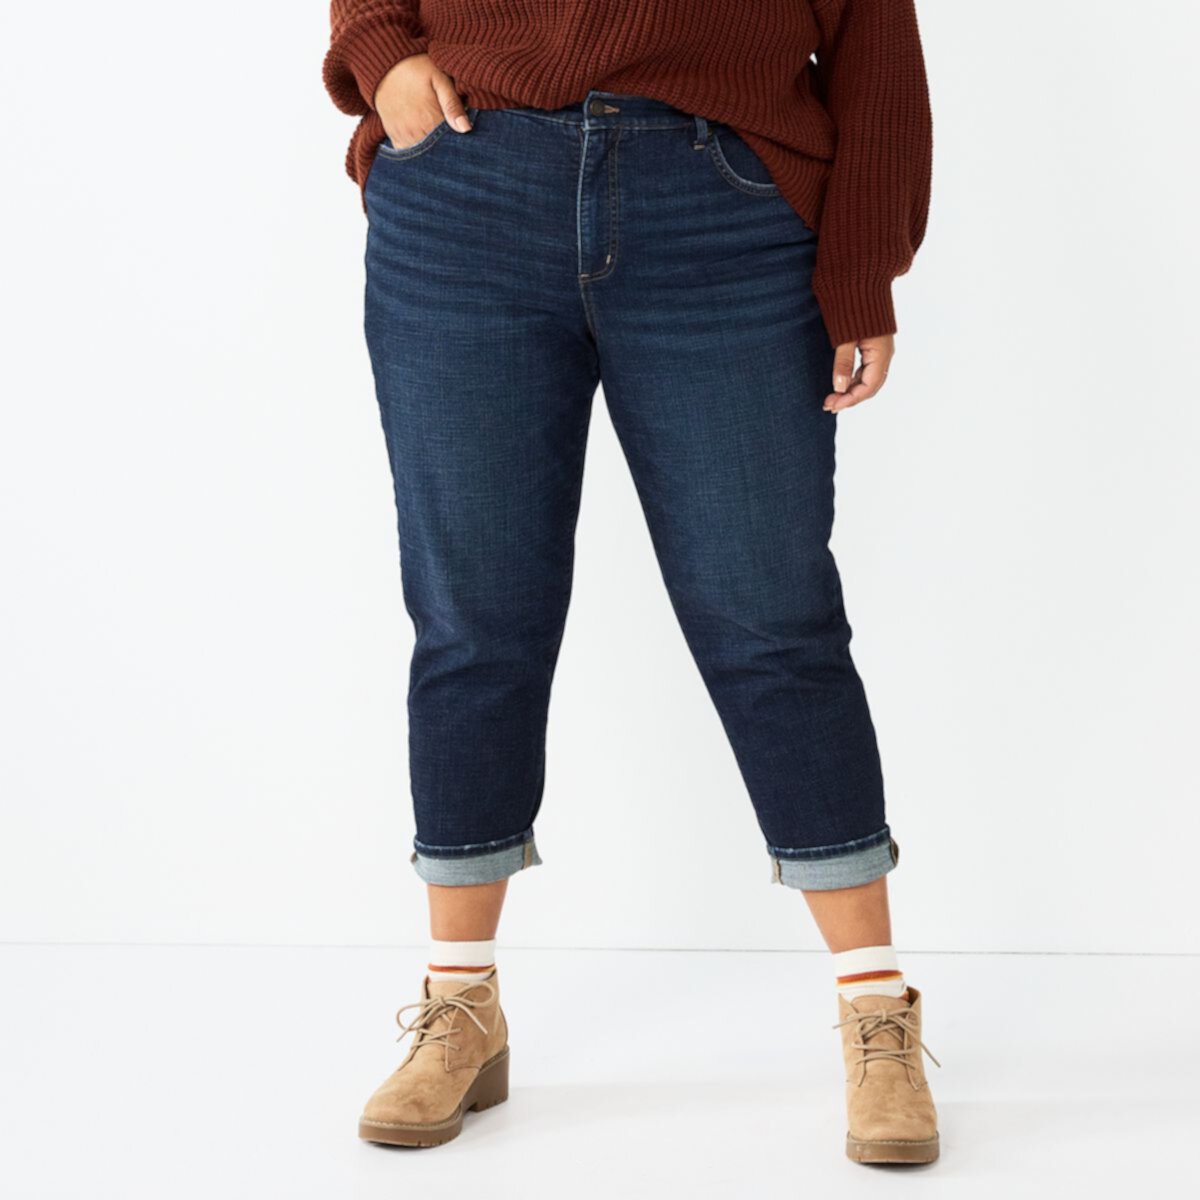 Plus Size Sonoma Goods For Life® High-Waisted Boyfriend Jeans SONOMA